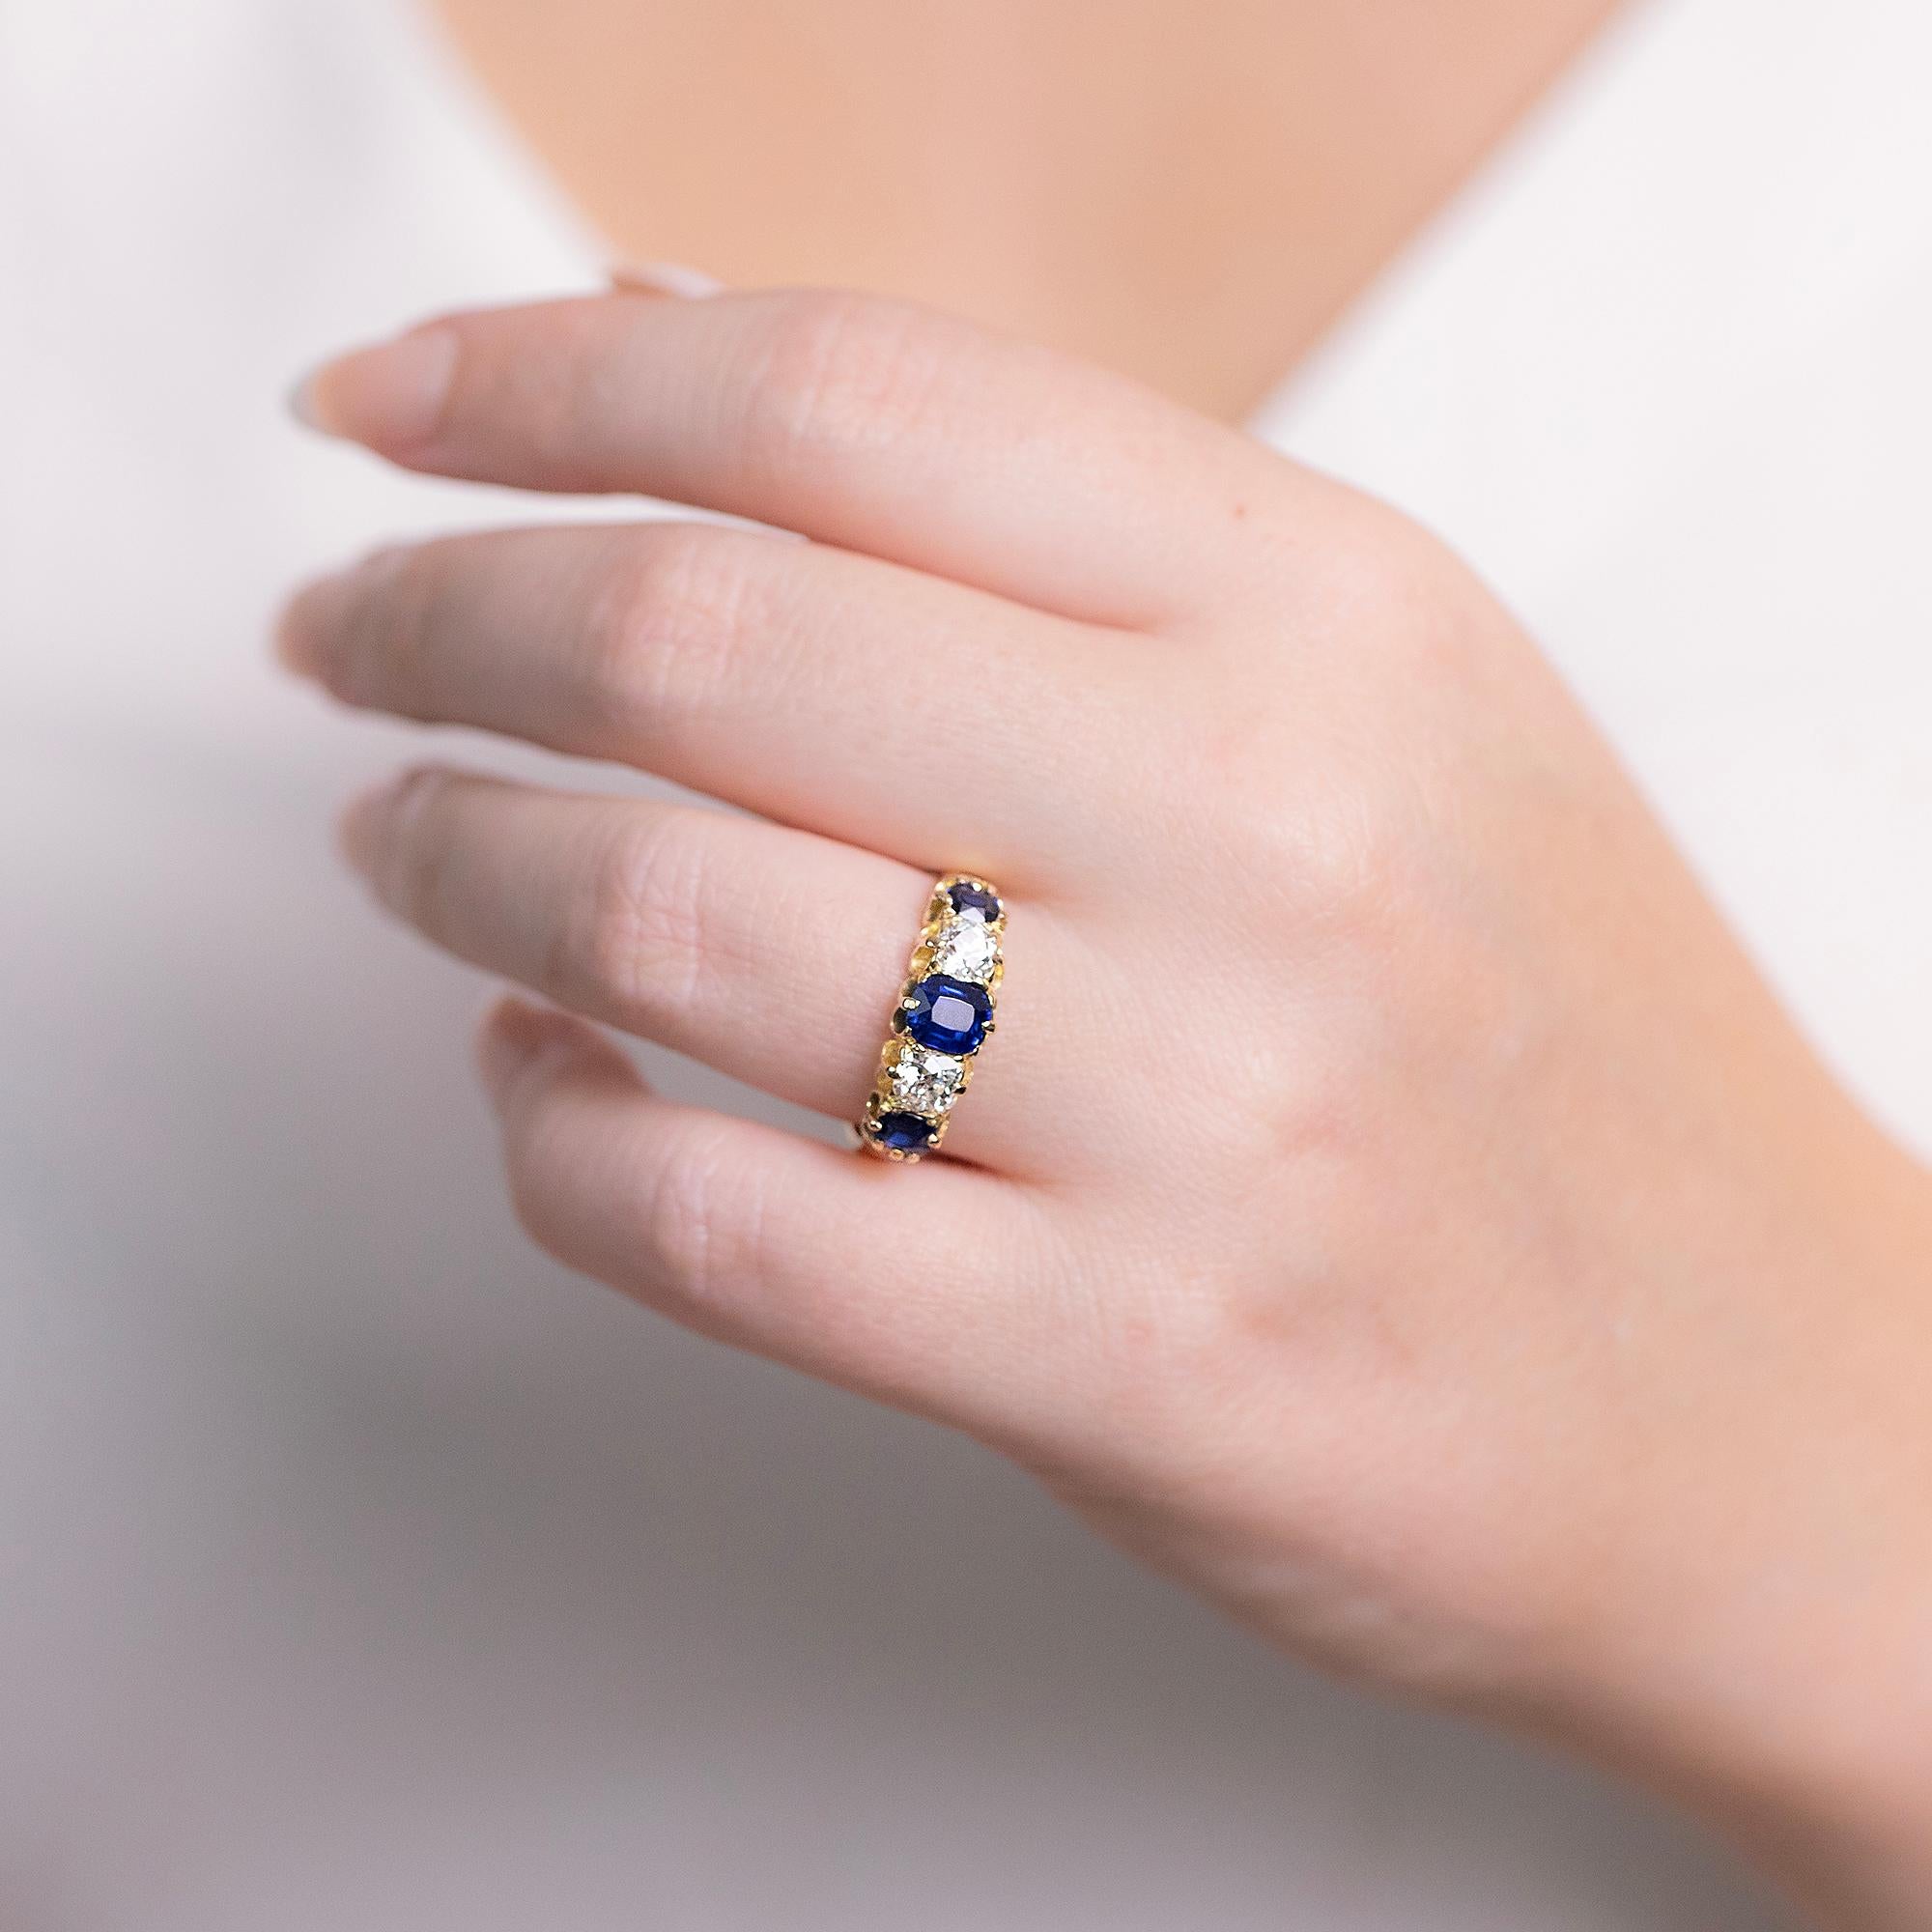 This beautiful restored Edwardian half hoop ring features three deep blue sapphire with two early European cut diamonds set in a stunning yellow gold scalloped setting.
The half hoop is a lovely style, sitting across the top of the finger, making